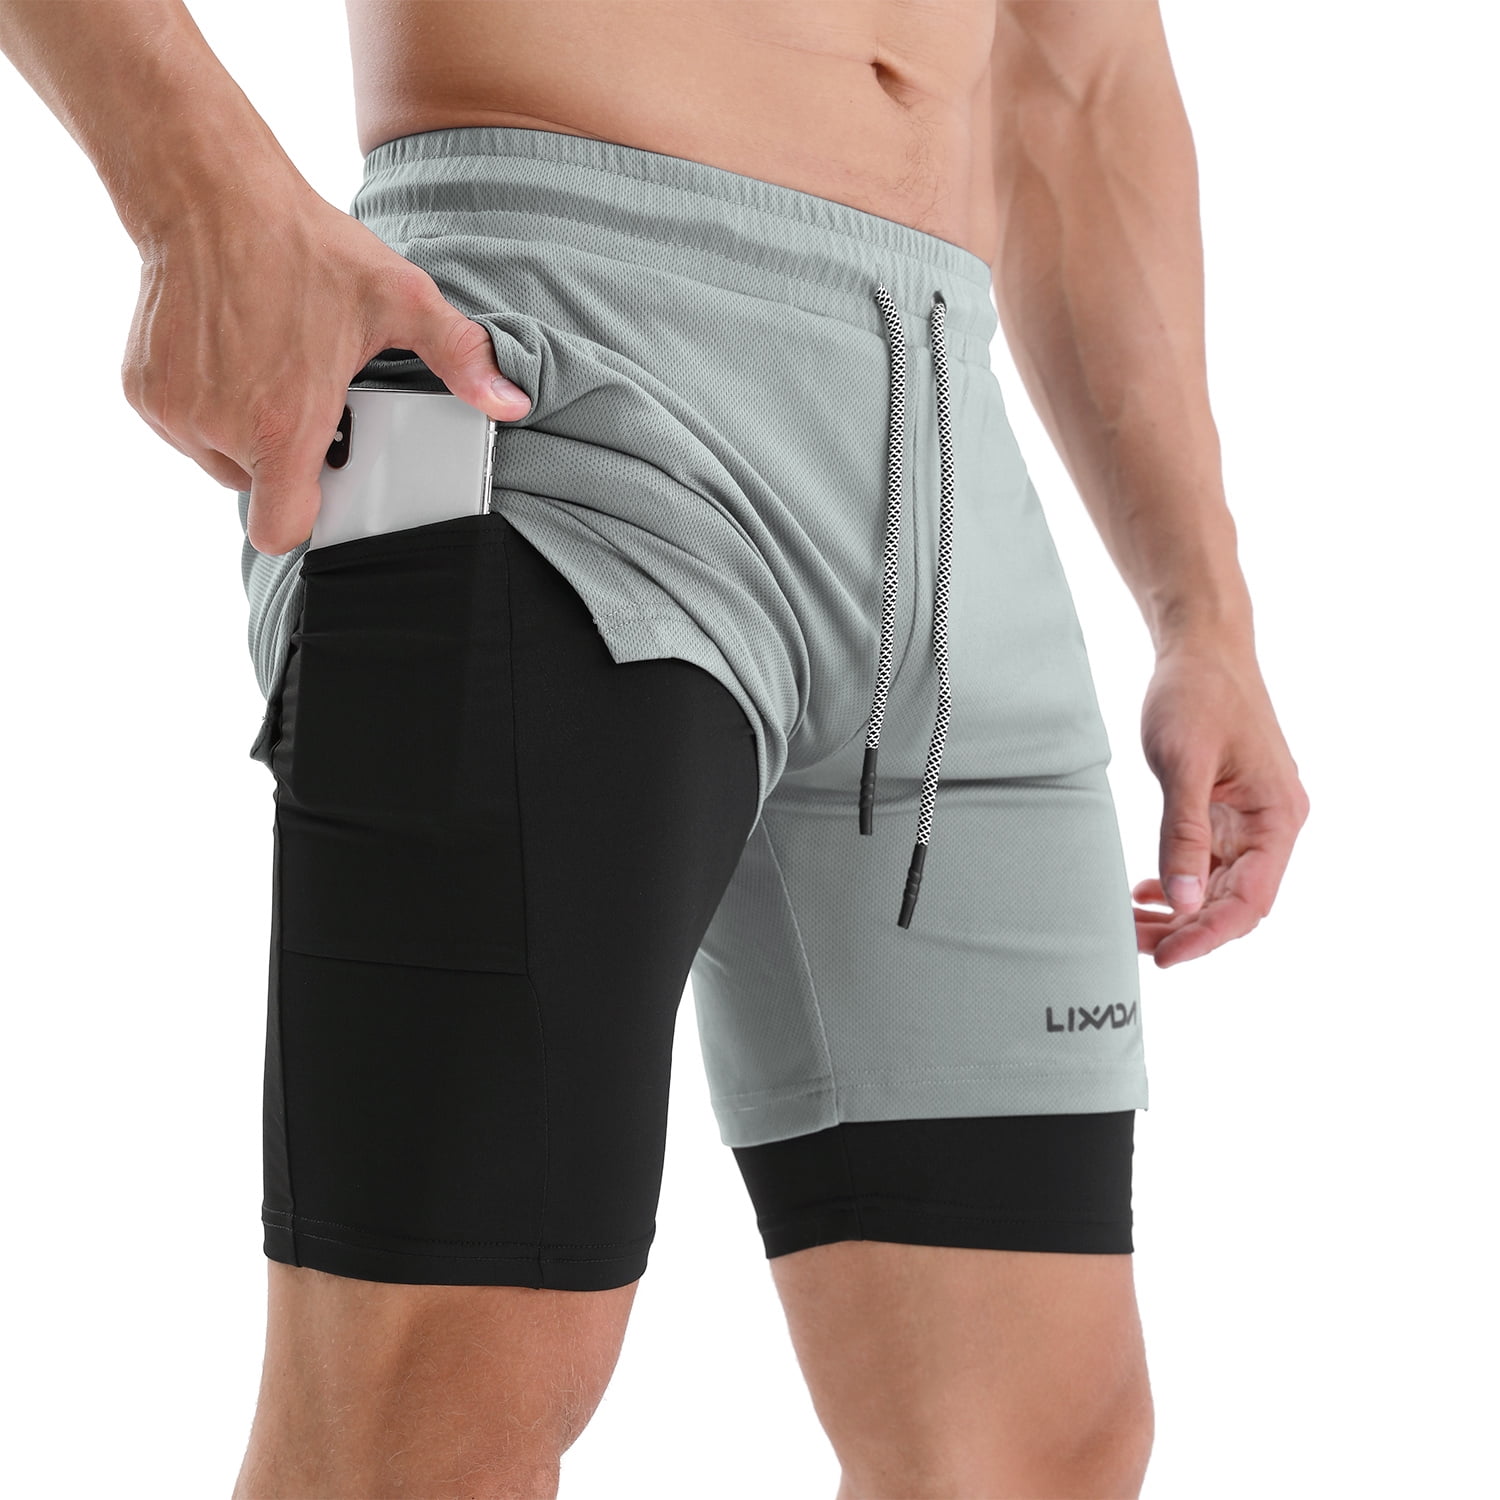 MECH-ENG Mens 2 in 1 Shorts Workout Running Training Gym 7 Short with Towel Loop